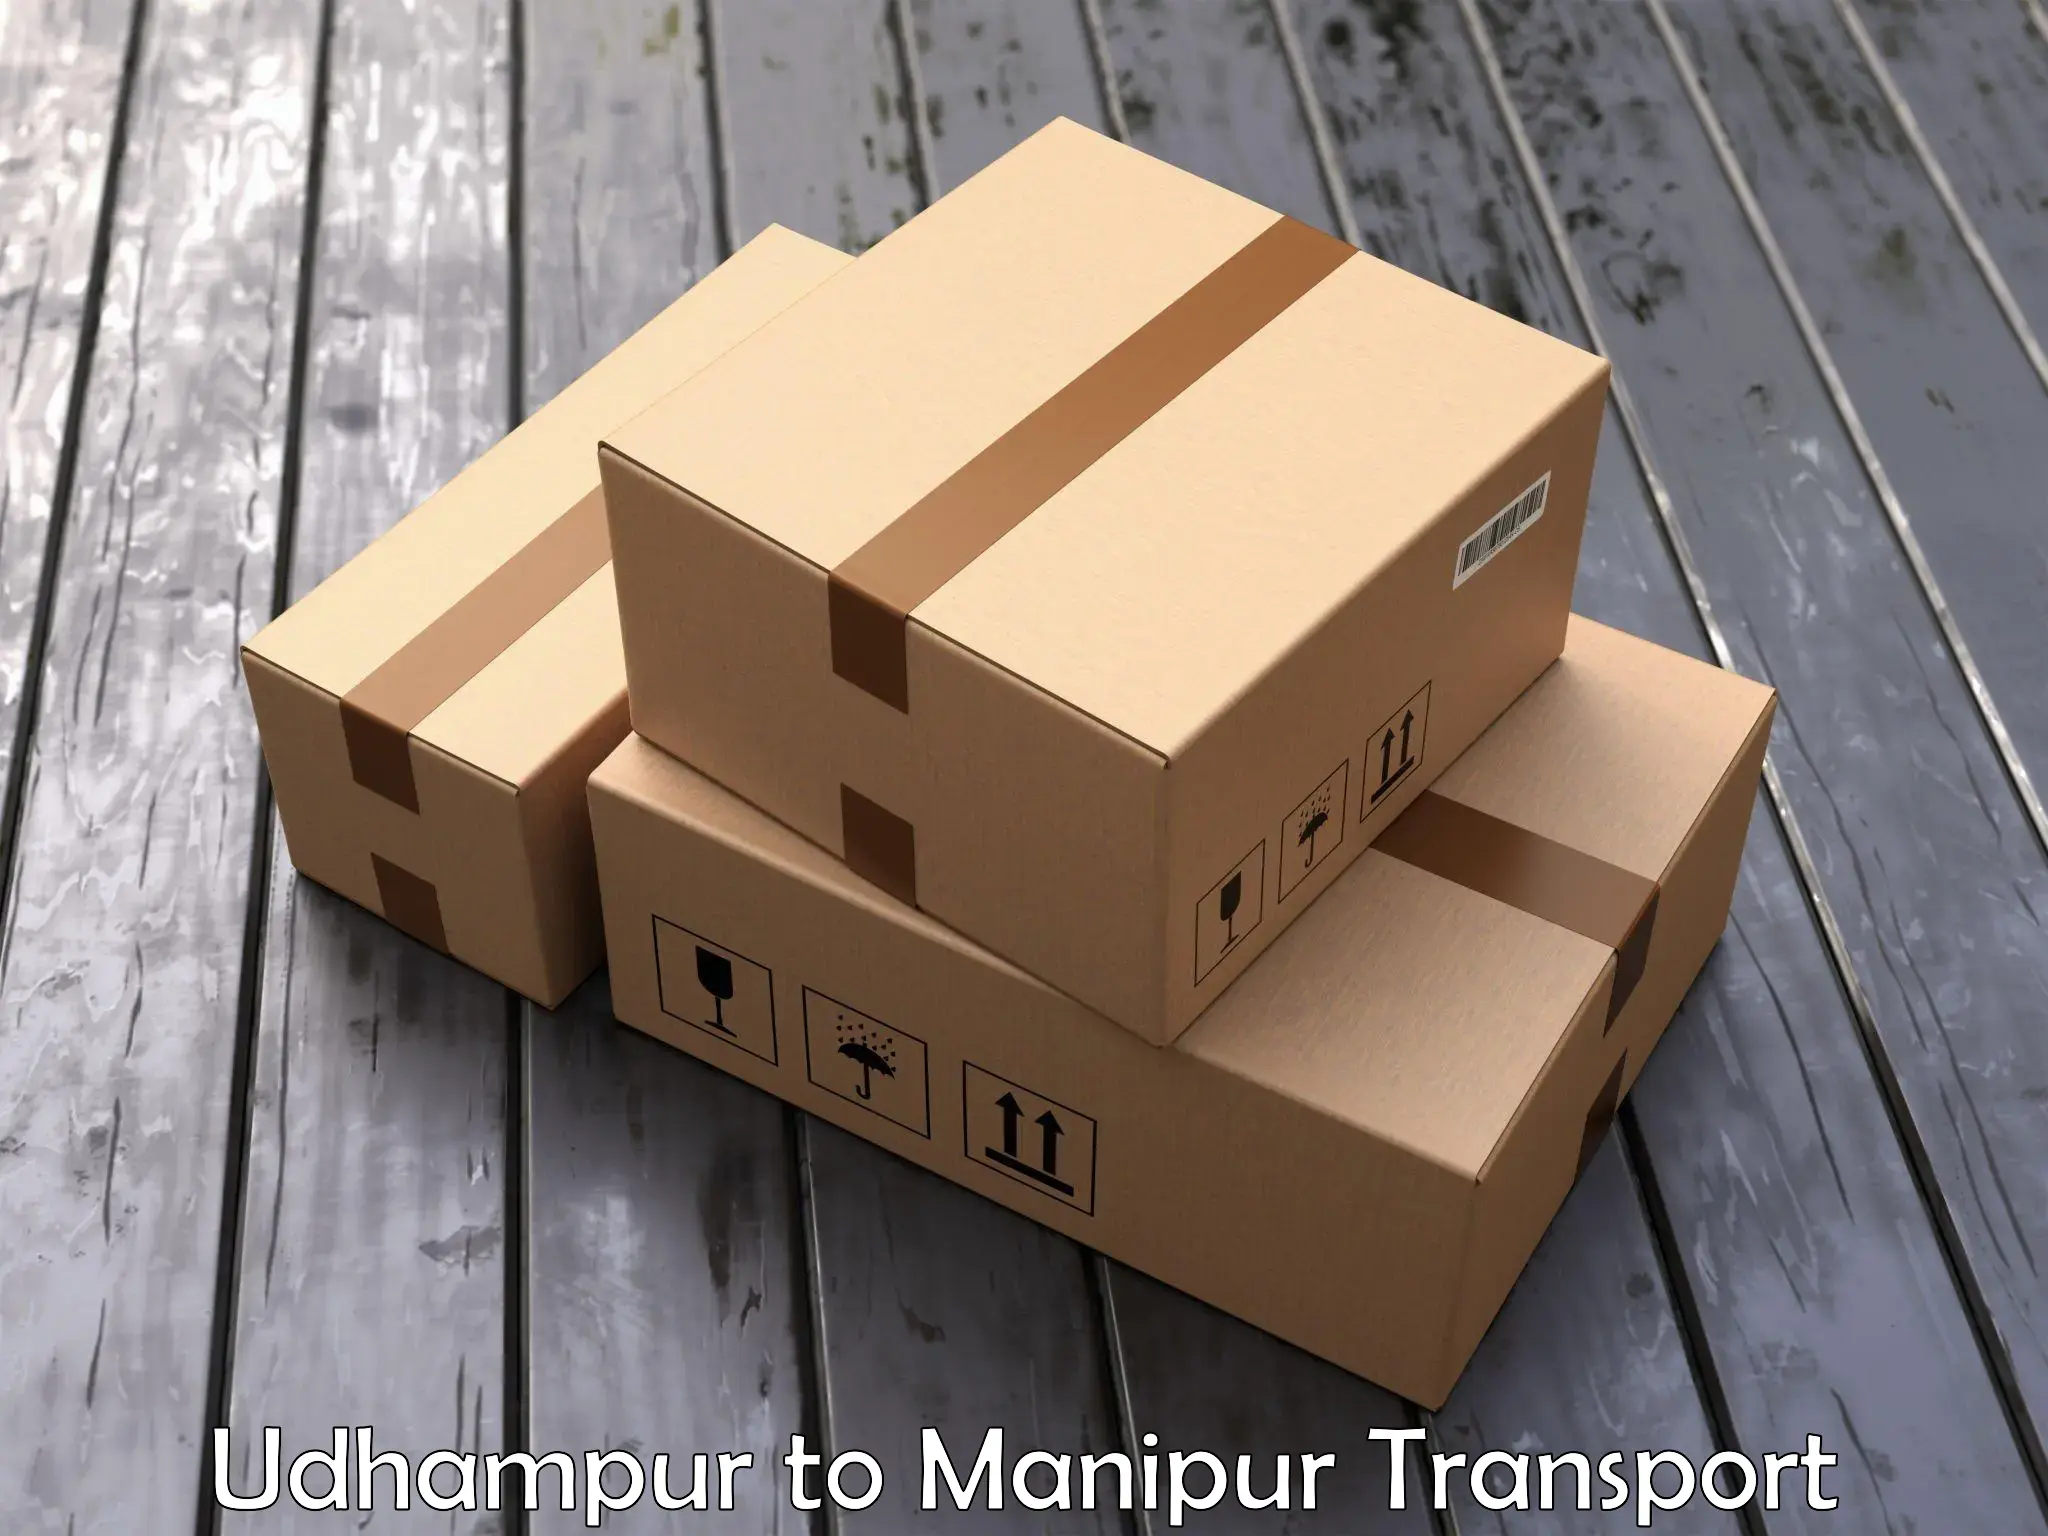 Cycle transportation service Udhampur to Manipur